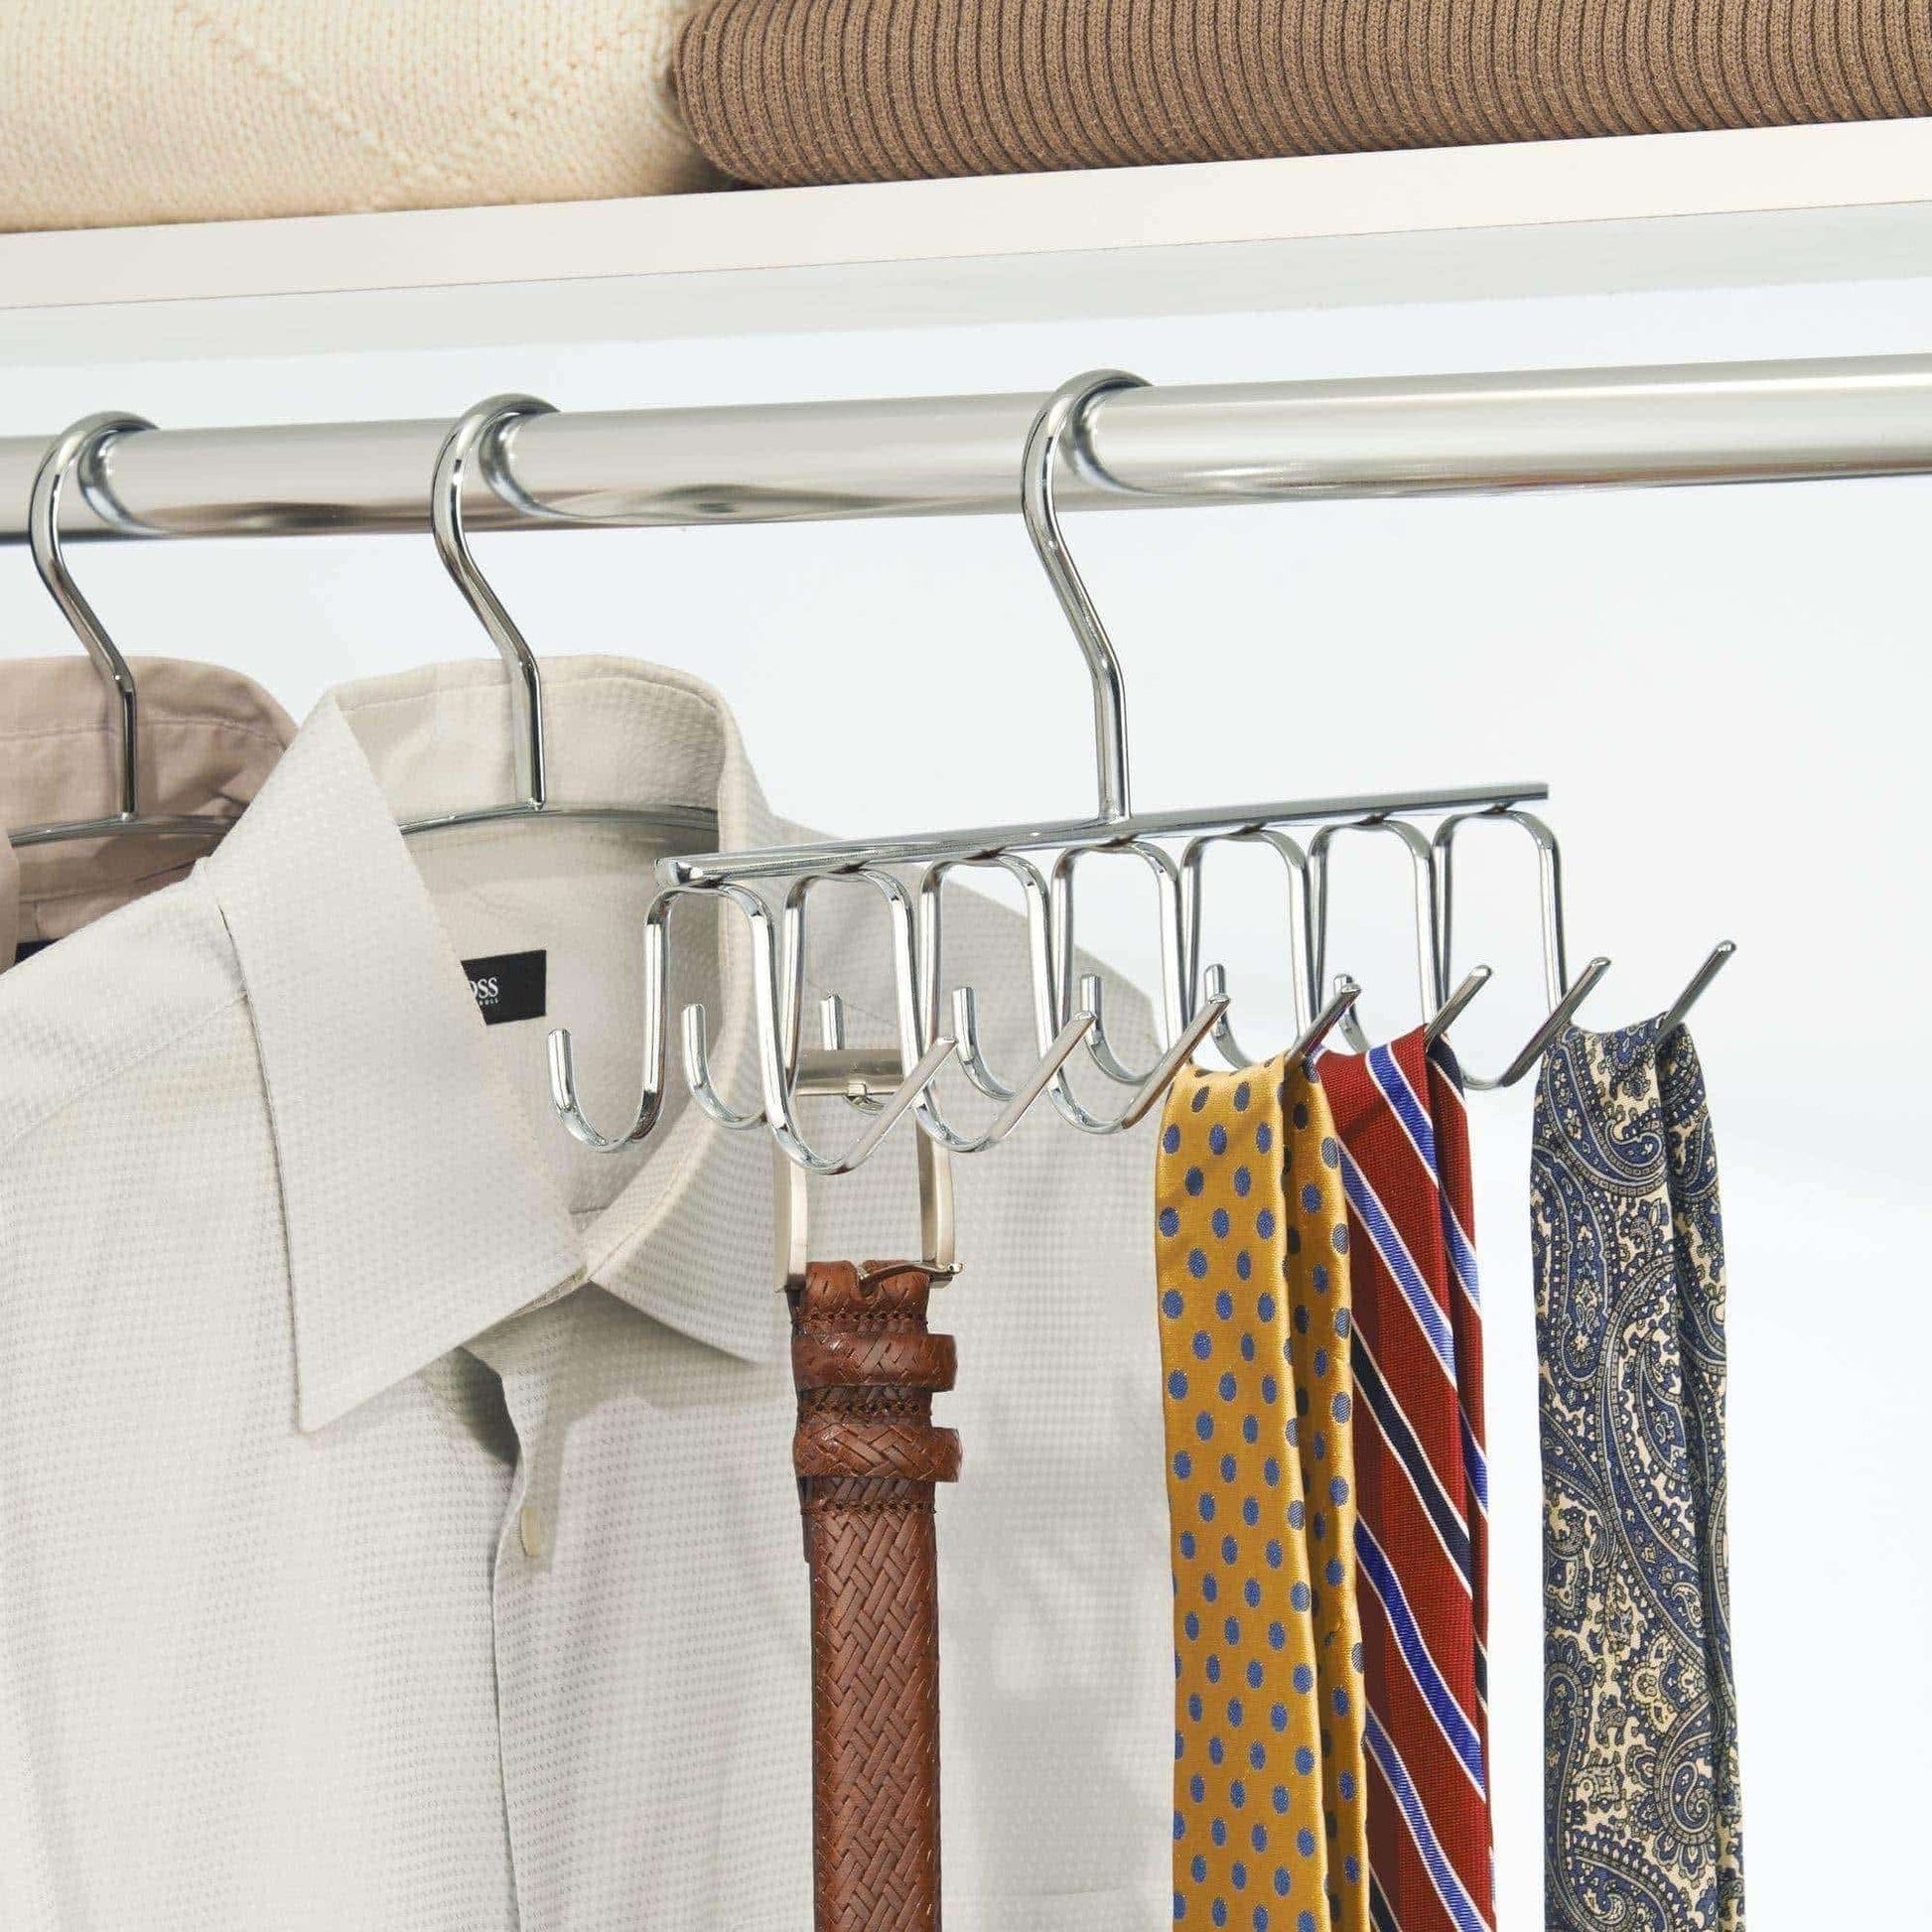 Online shopping interdesign axis closet storage organizer rack for ties and belts chrome